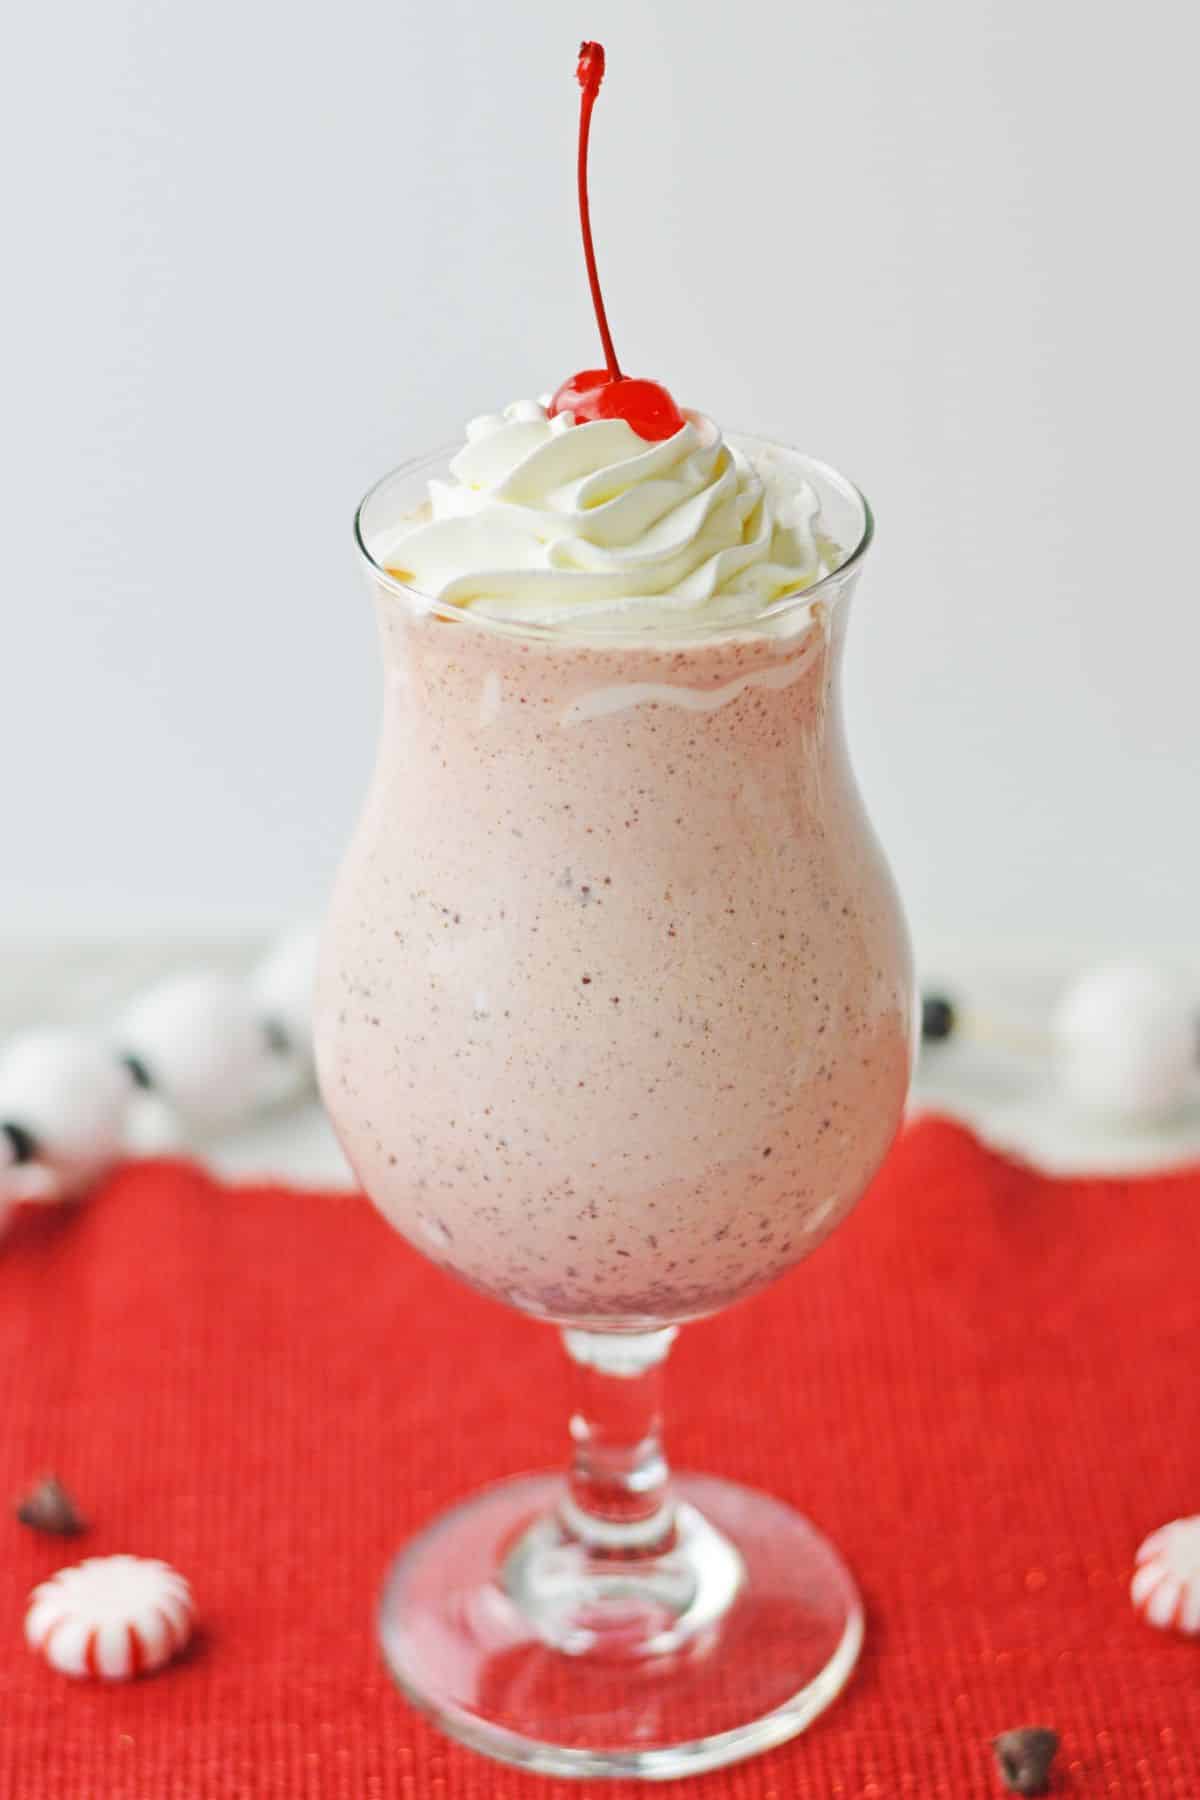 pink shake with whipped cream and cherry